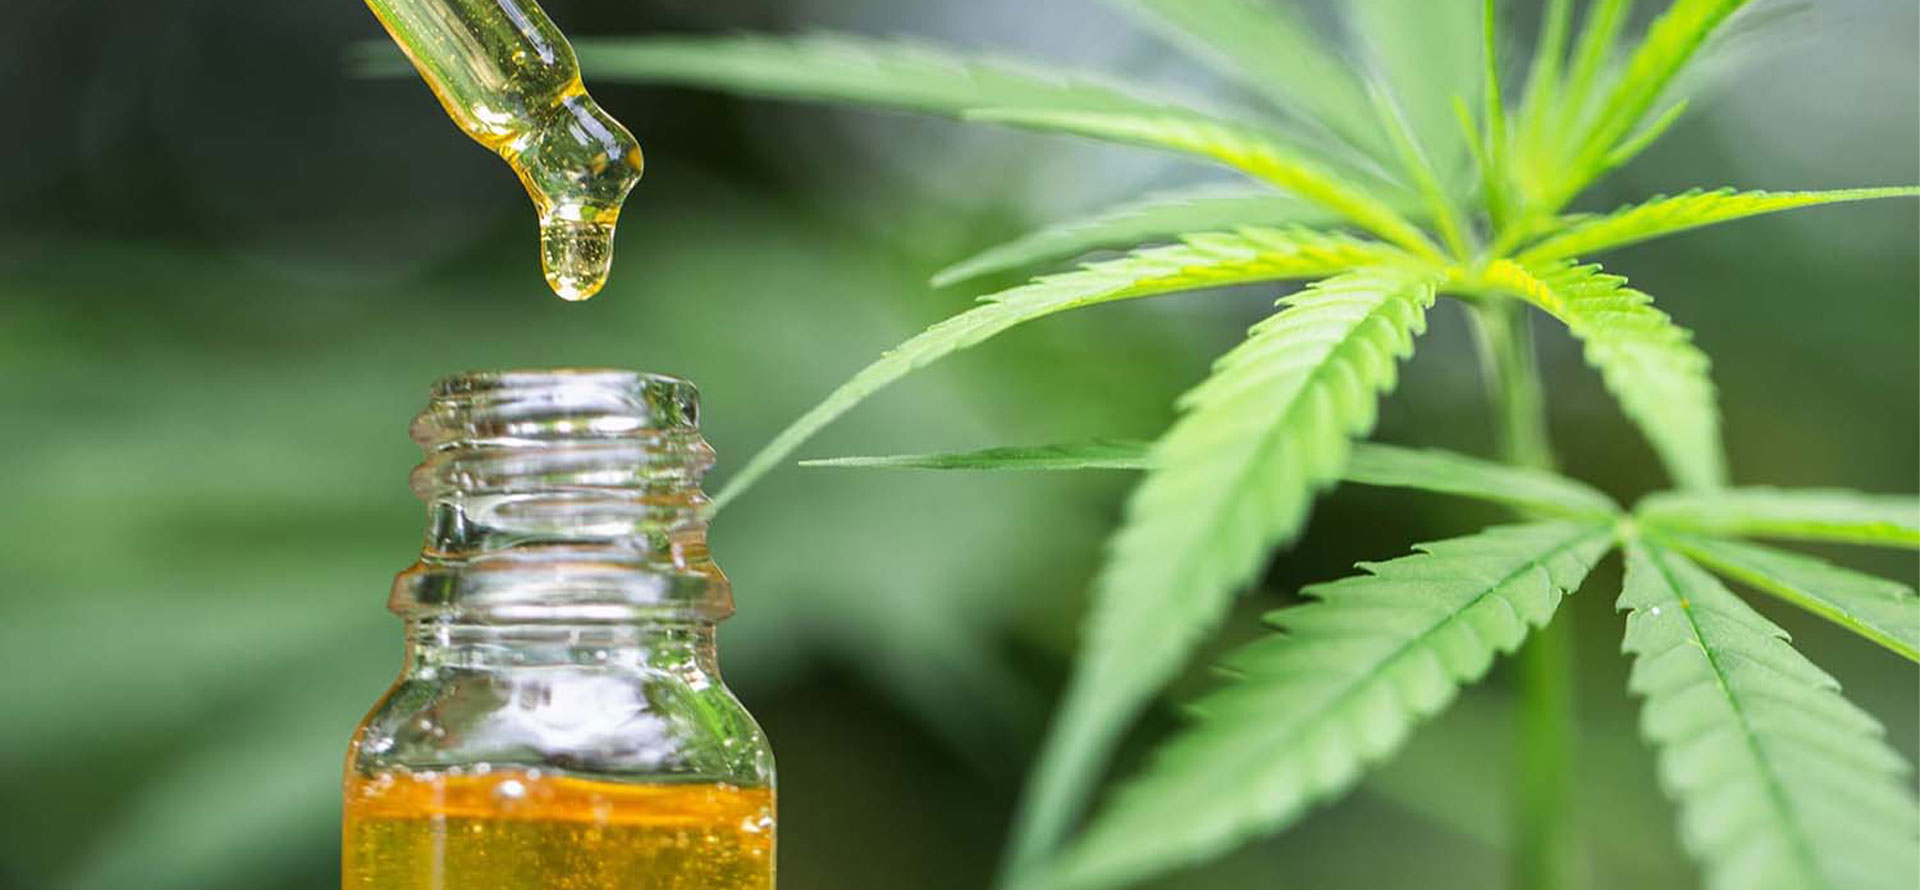 PURE CBC OIL WITH NO ADDITIVES OR PRESERVATIVES - Cbd|Oil|Benefits|Cbc|Effects|Pain|Study|Health|Thc|Products|Cannabinoids|Studies|Research|Anxiety|Cannabis|Symptoms|Evidence|People|System|Disease|Treatment|Inflammation|Hemp|Body|Receptors|Disorders|Brain|Plant|Cells|Side|Effect|Blood|Patients|Cancer|Product|Skin|Marijuana|Properties|Cannabidiol|Cannabinoid|Cbd Oil|Cbd Products|Cbc Oil|Side Effects|Endocannabinoid System|Chronic Pain|Multiple Sclerosis|Pain Relief|Cannabis Plant|Cbd Oil Benefits|Blood Pressure|Health Benefits|High Blood Pressure|Anti-Inflammatory Properties|Neuropathic Pain|Animal Studies|Hemp Plant|Hemp Oil|Anxiety Disorders|Cbd Product|Immune System|Clinical Trials|Cbd Gummies|Nerve Cells|Nervous System|Entourage Effect|Hemp Seed Oil|United States|Cbd Oils|Drug Administration